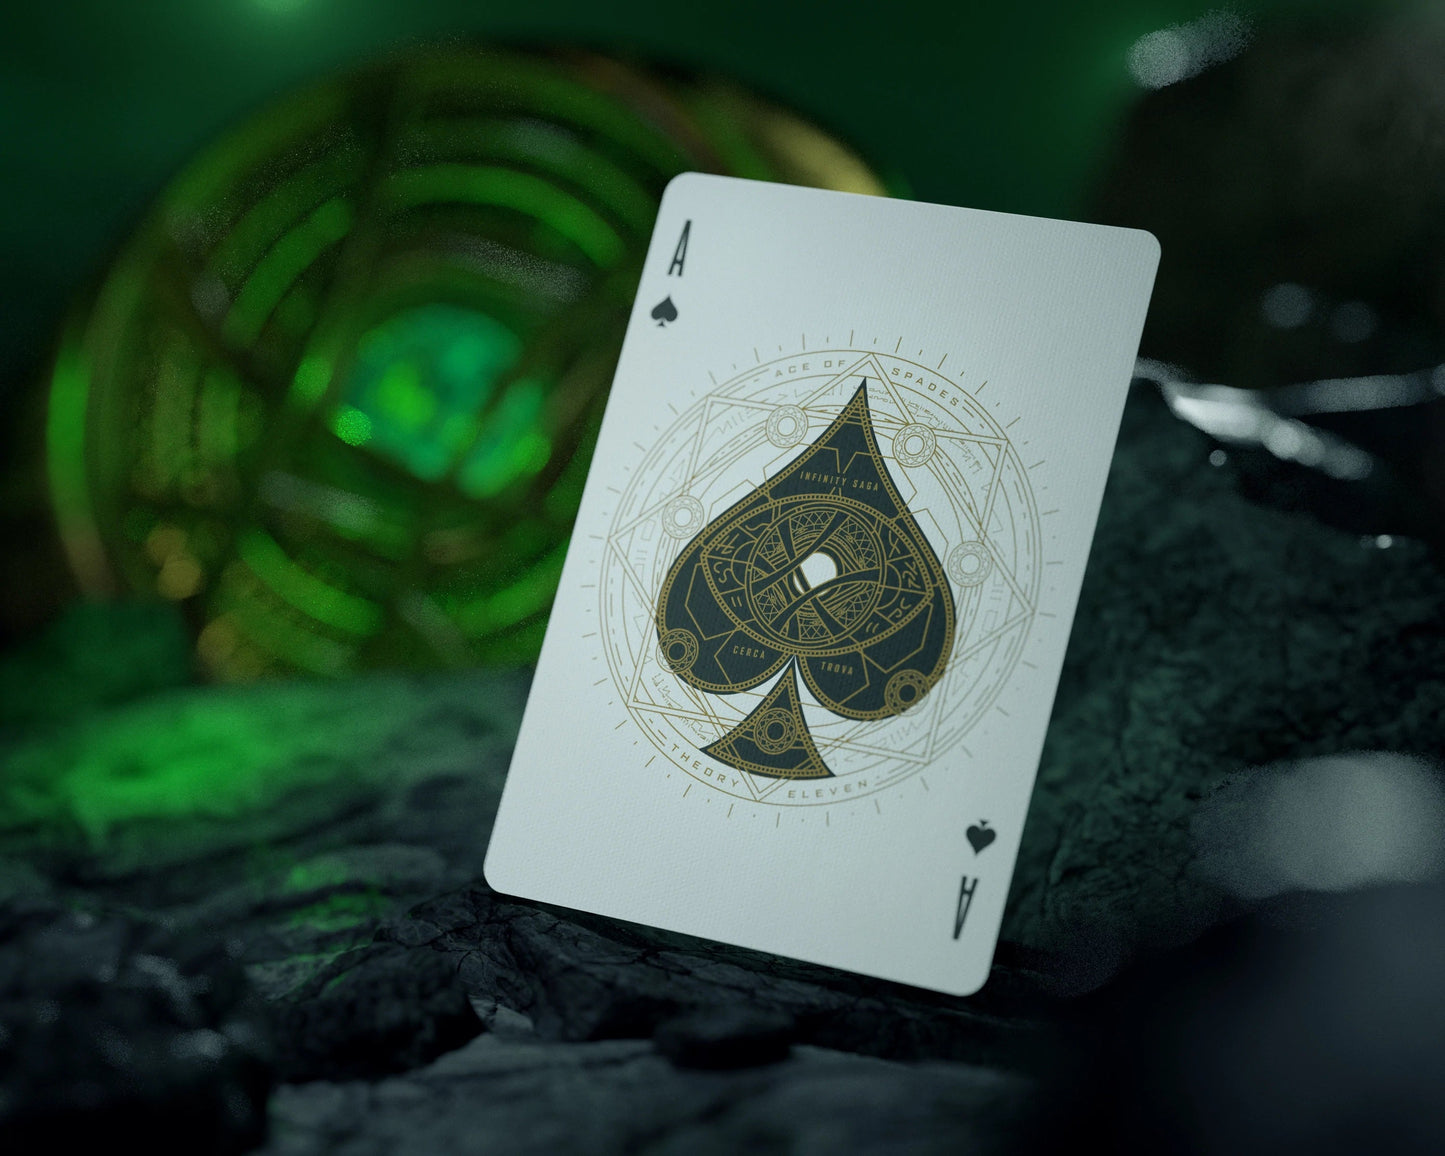 Avengers Playing Cards - Green